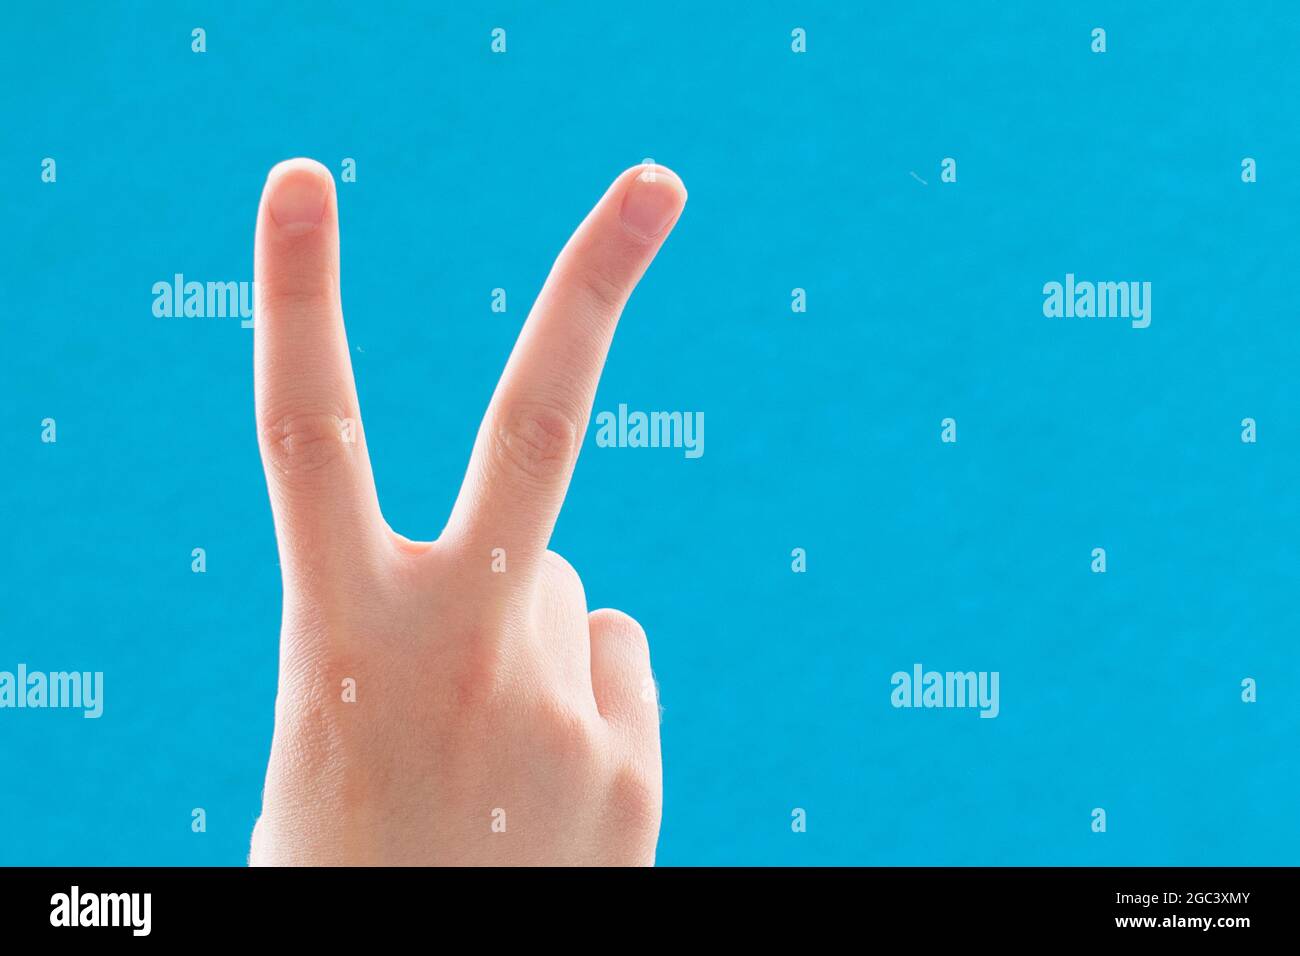 Close-up hand with two fingers up in a symbol of peace or victory. Also a sign for the letter V in sign language. On a blue background. Stock Photo